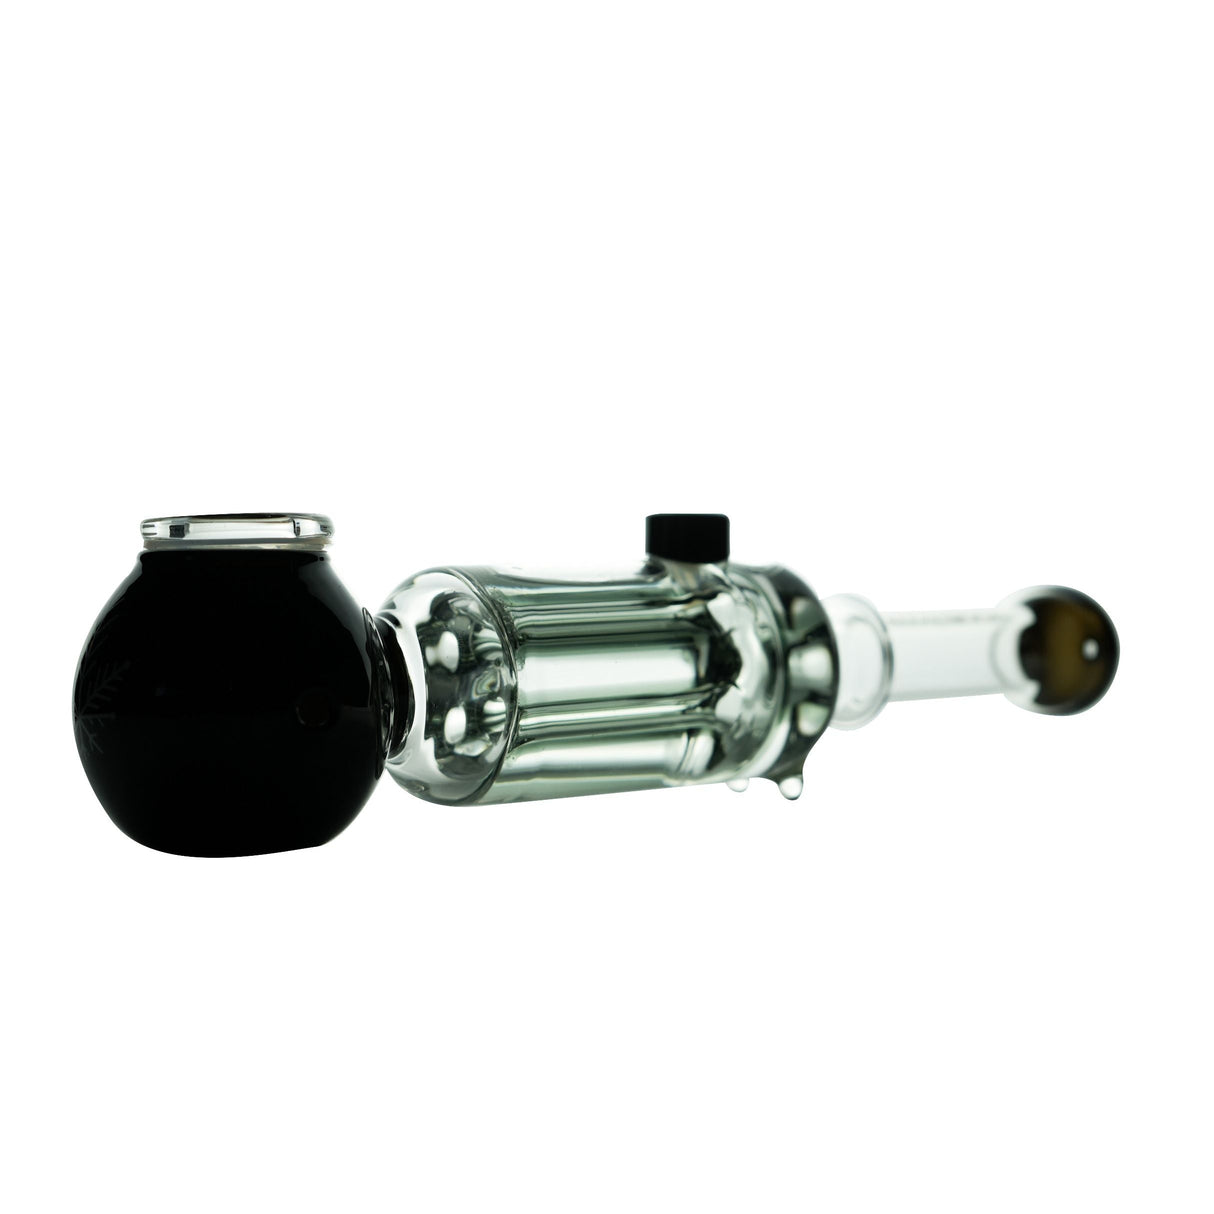 Freeze Pipe Revolver with six-chamber design, side view on white background, ideal for smooth hits